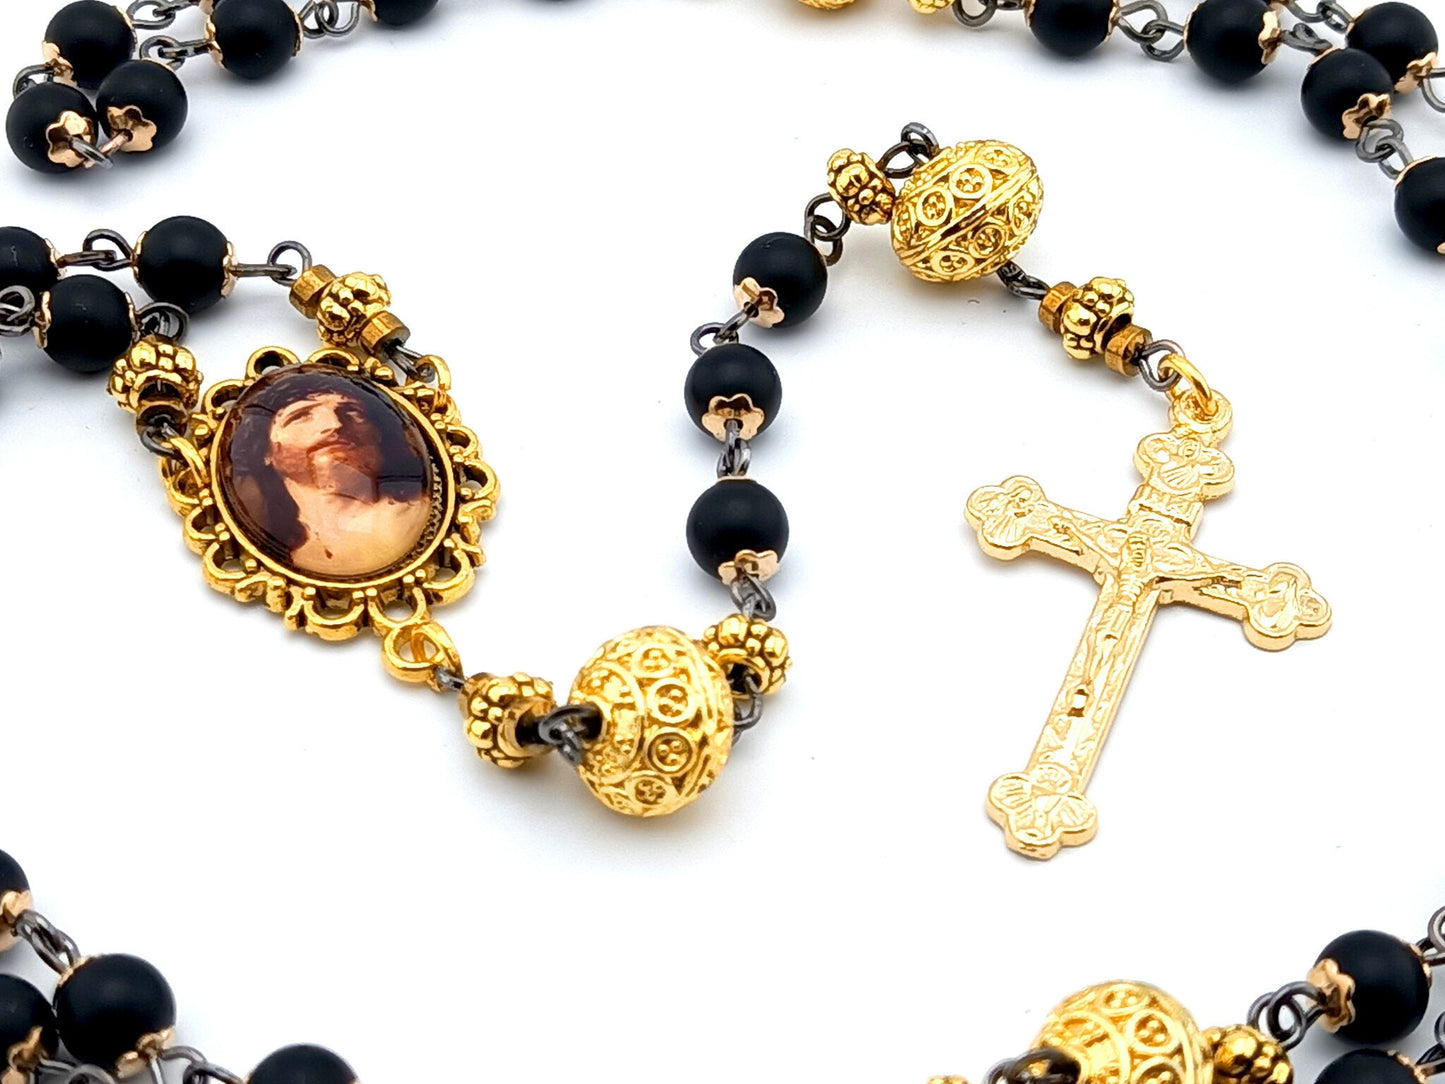 Crown of Thorns unique rosary beads with black onyx and gold beads, golden crucifix and picture centre medal.